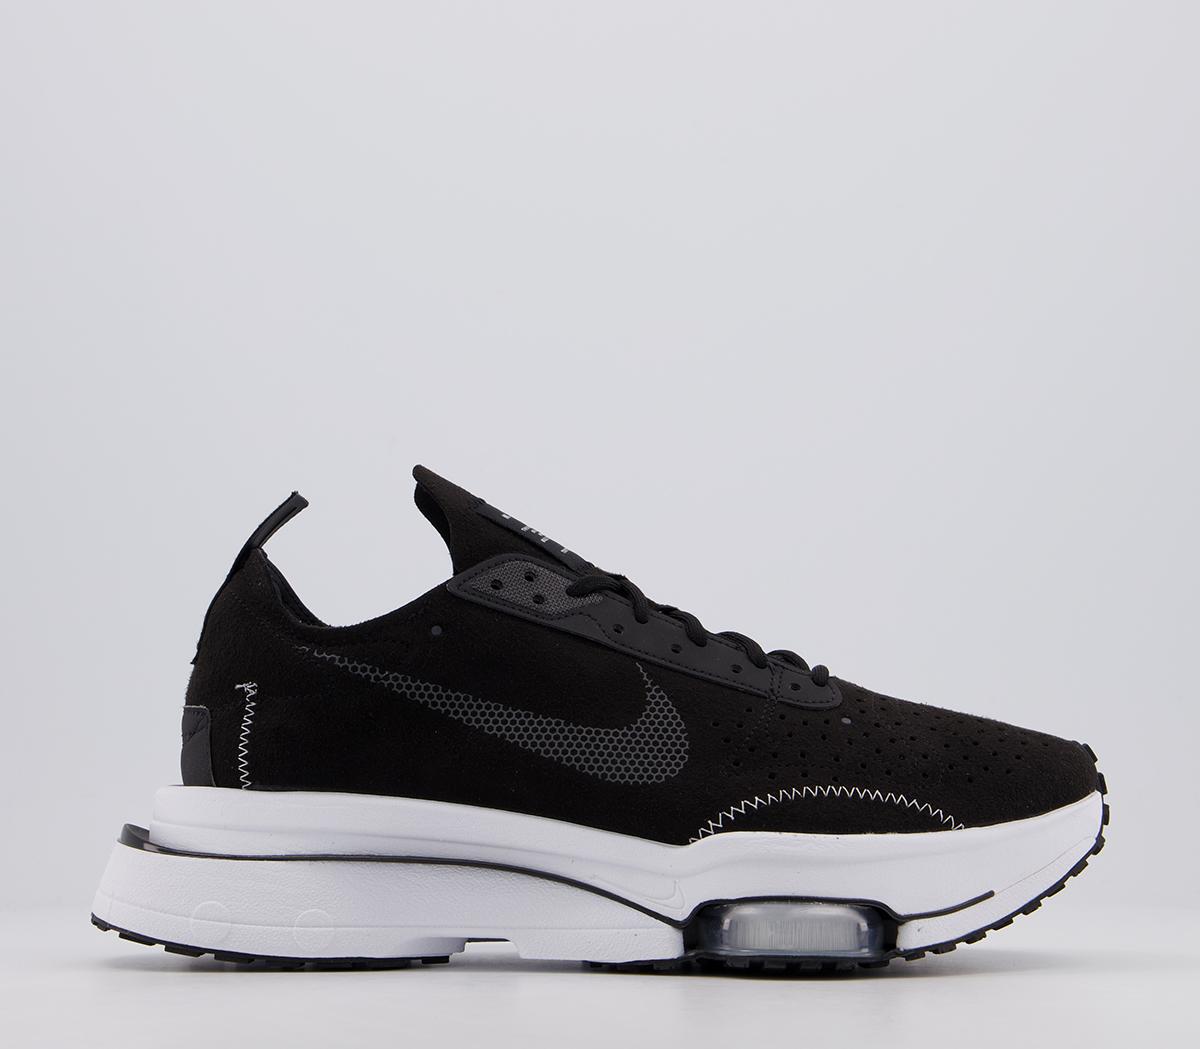 Nike Air Zoom Type Trainers Black Anthracite White - Unisex Sports